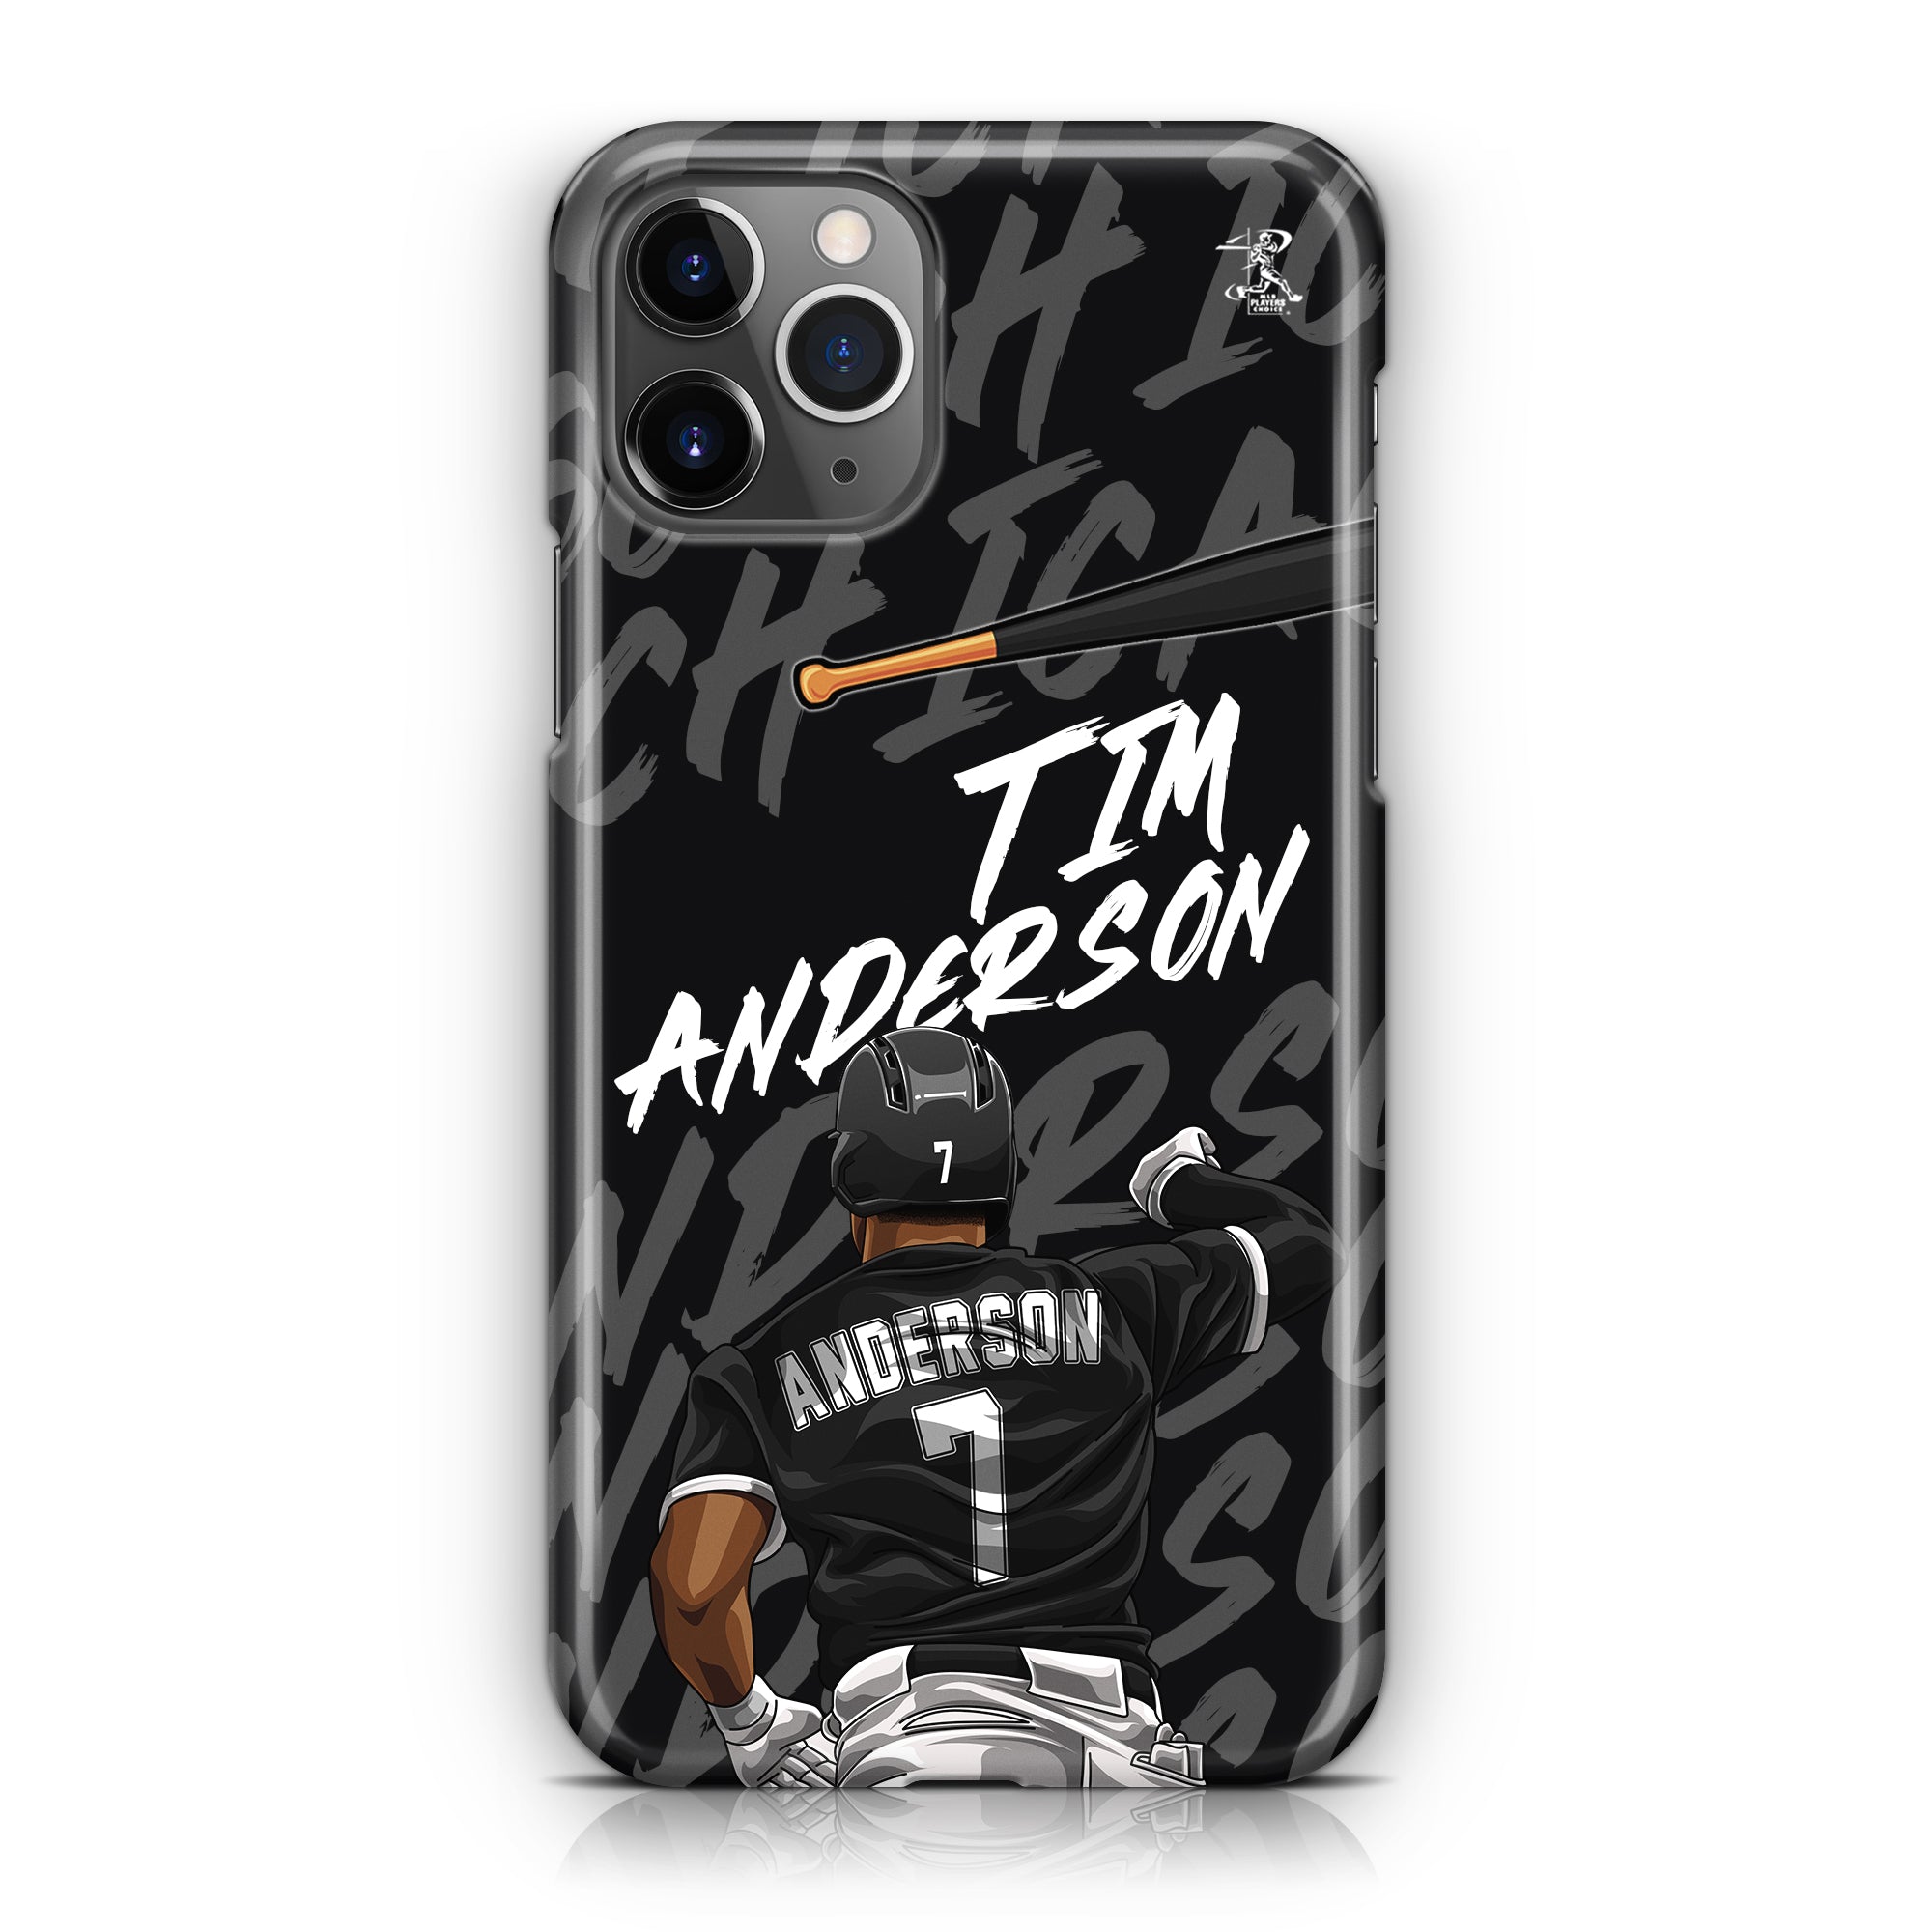 Anderson Star Series 2.0 Case